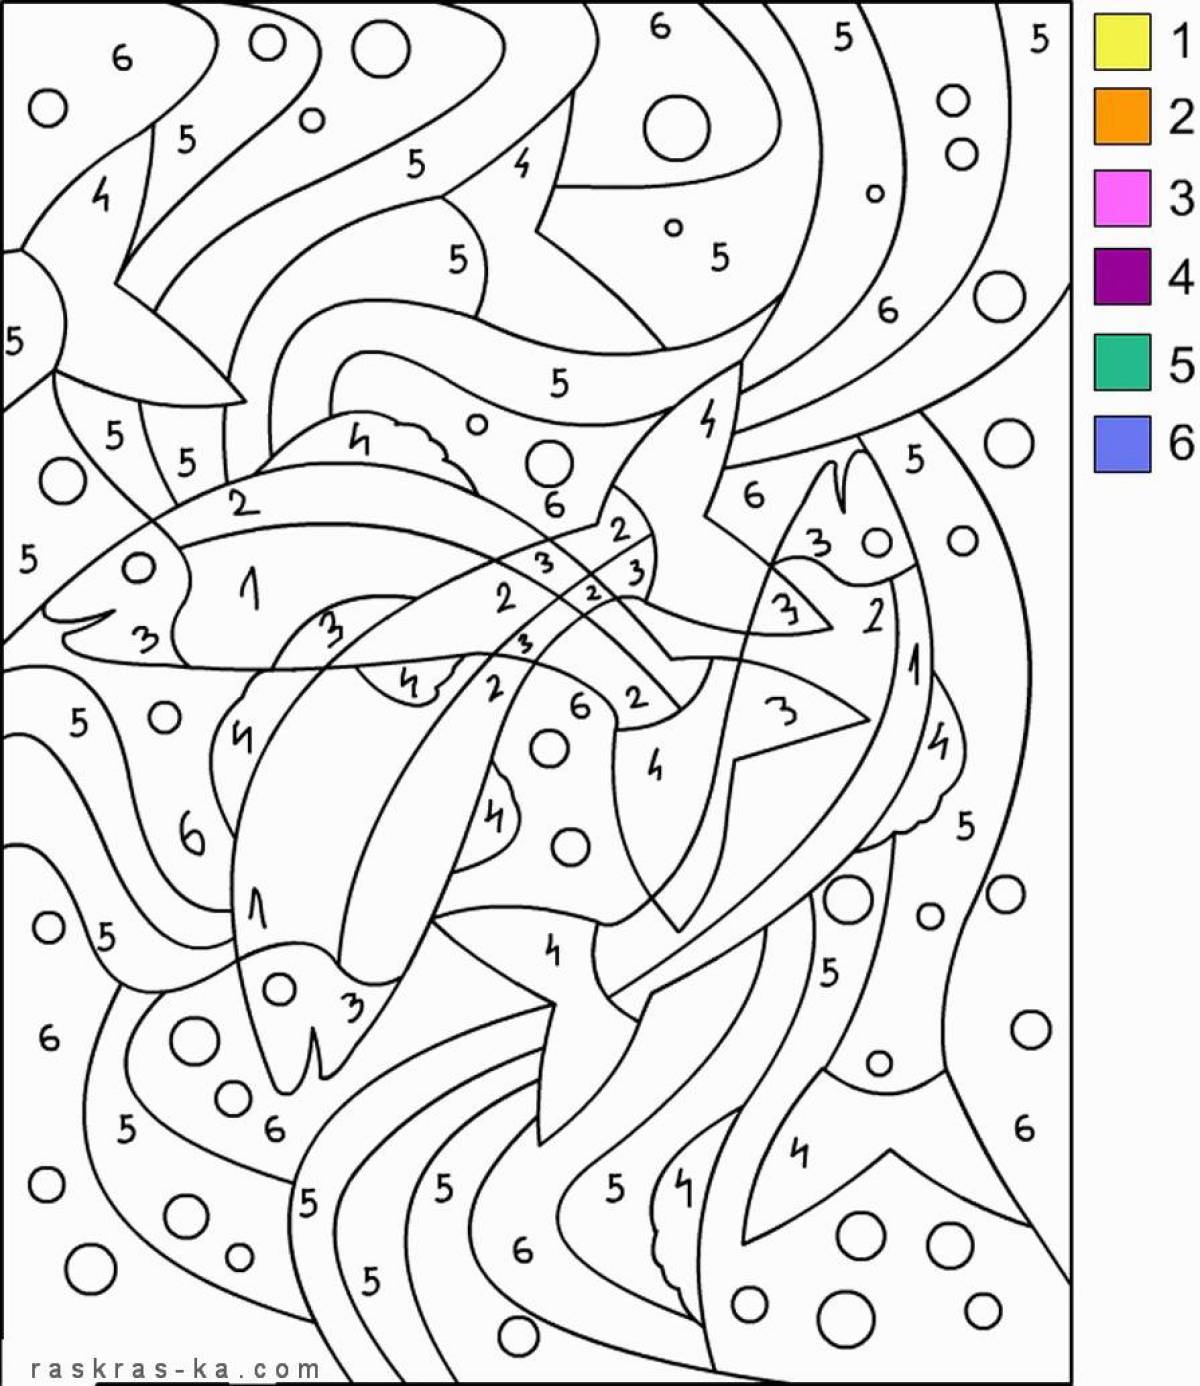 Creative coloring by numbers for kids 6-7 years old